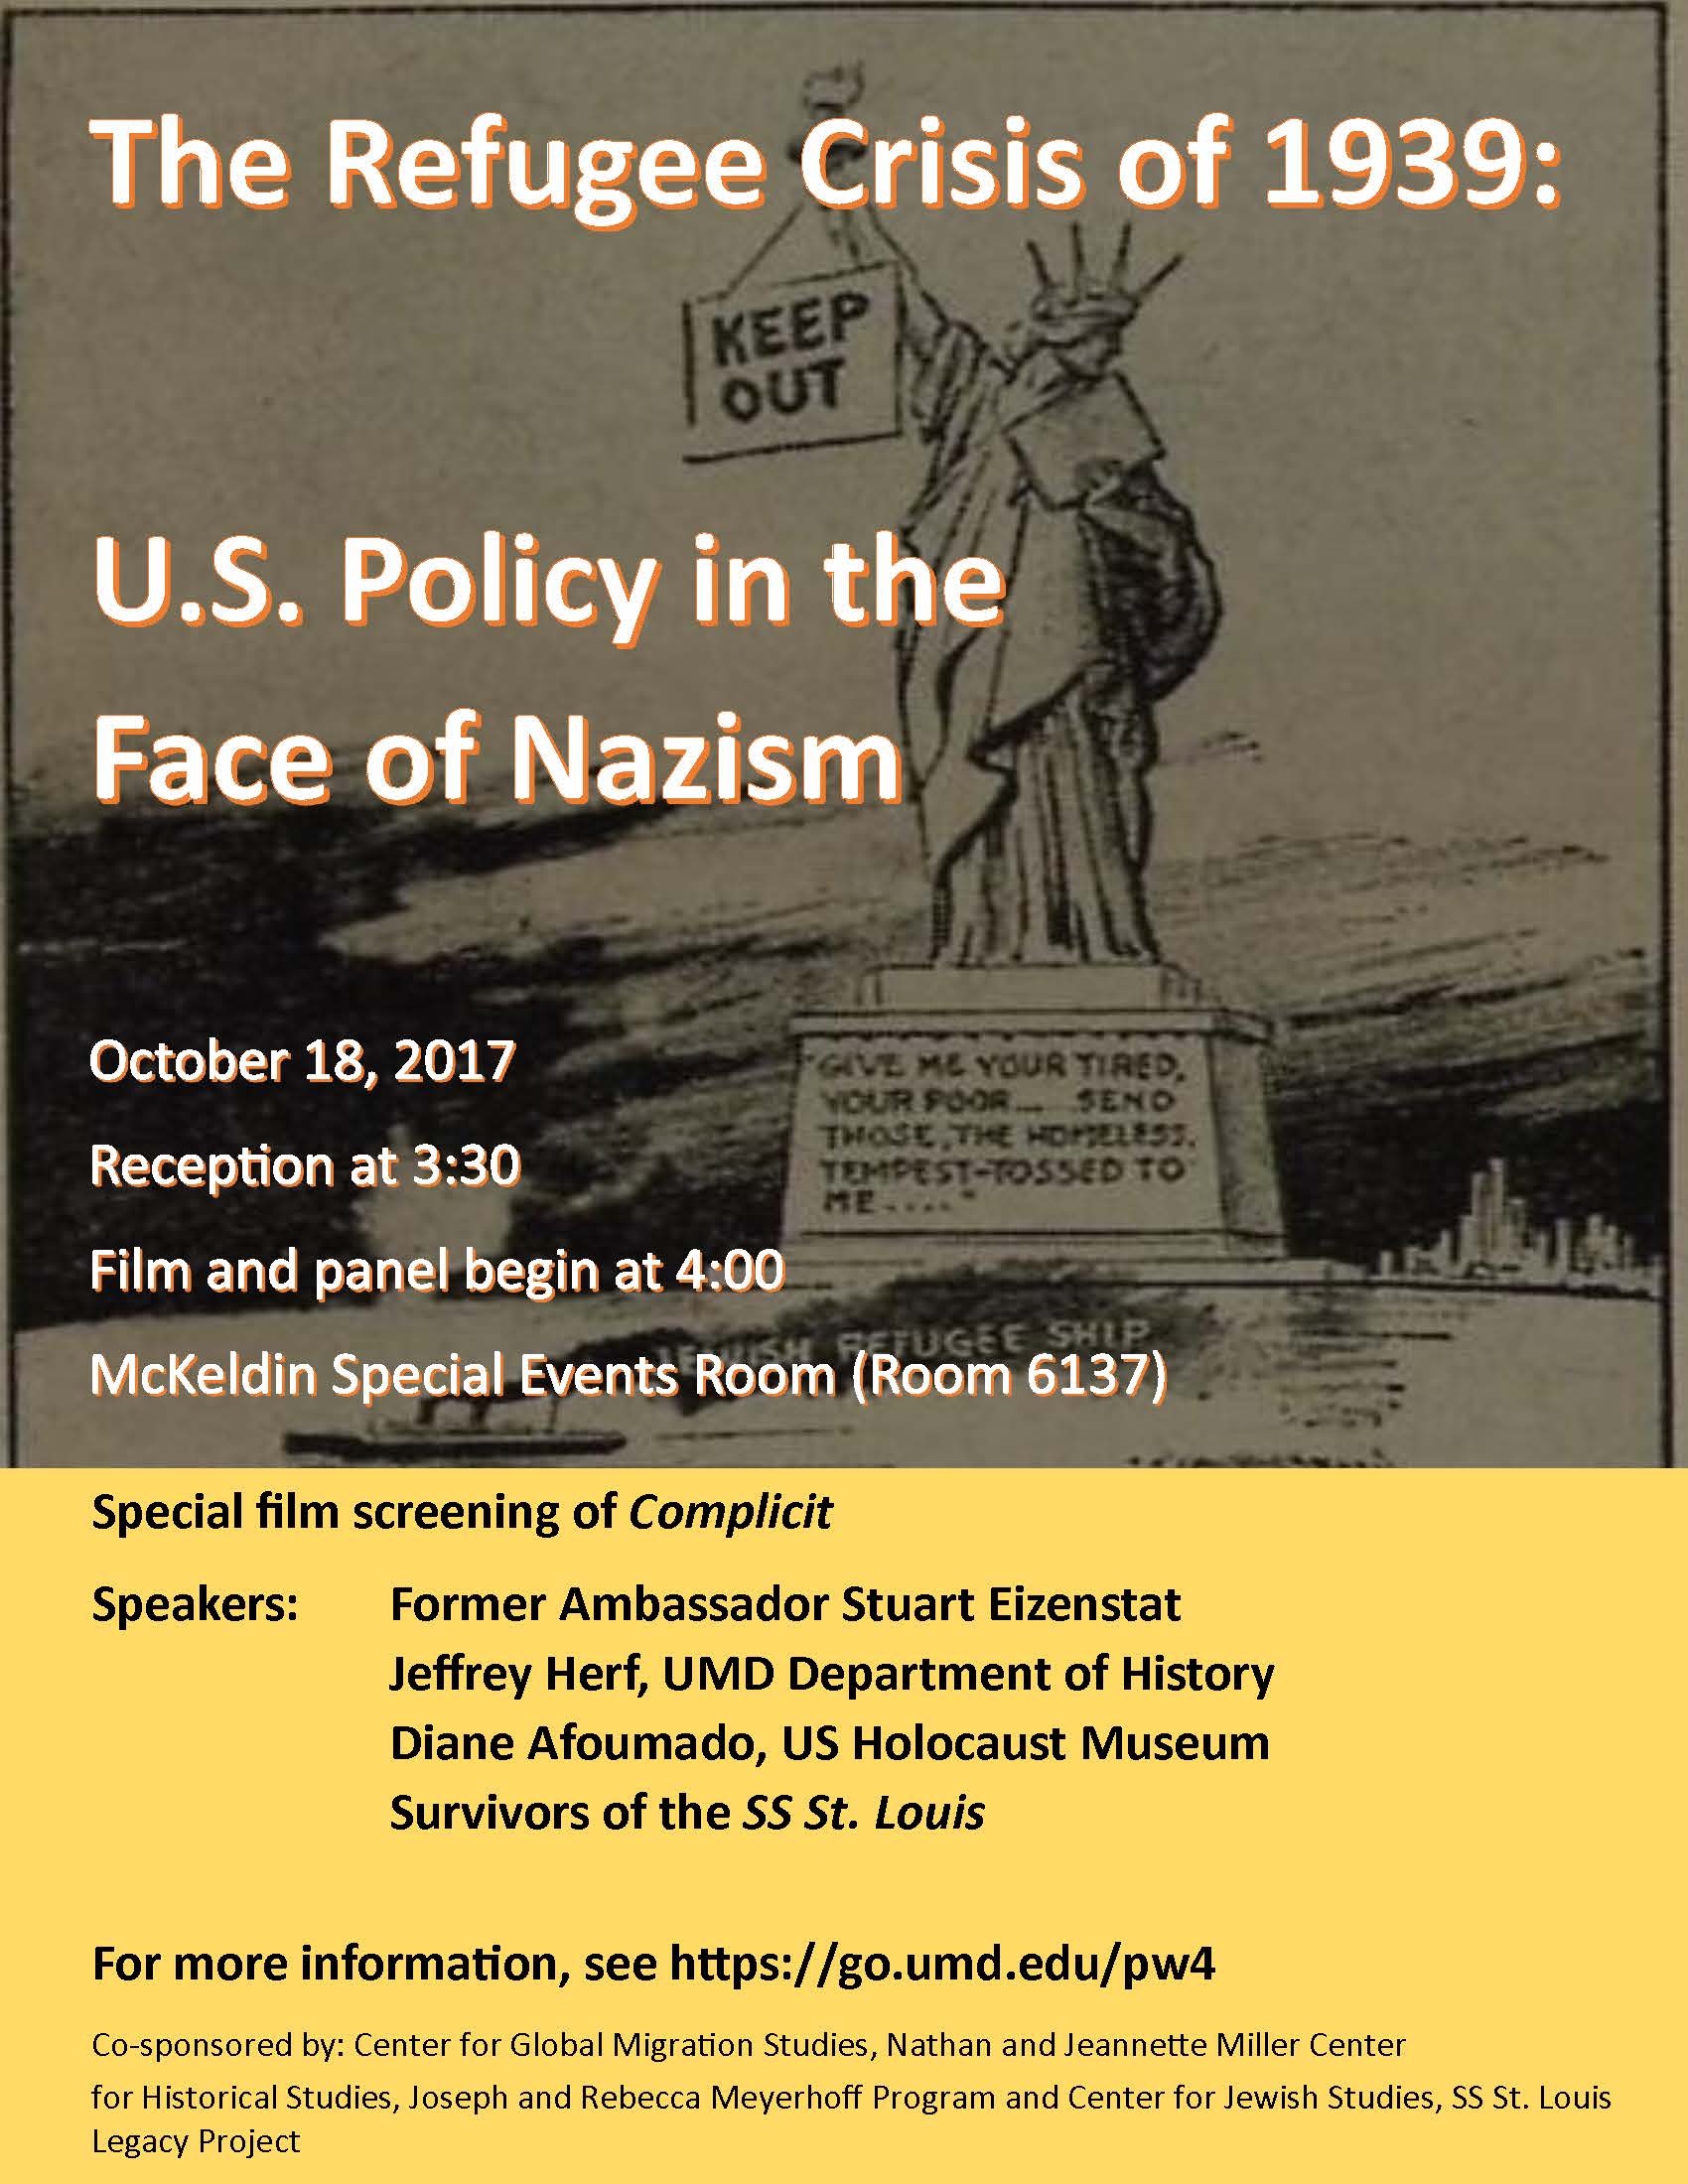 Image for event - "Complicit" Film Screening and Discussion